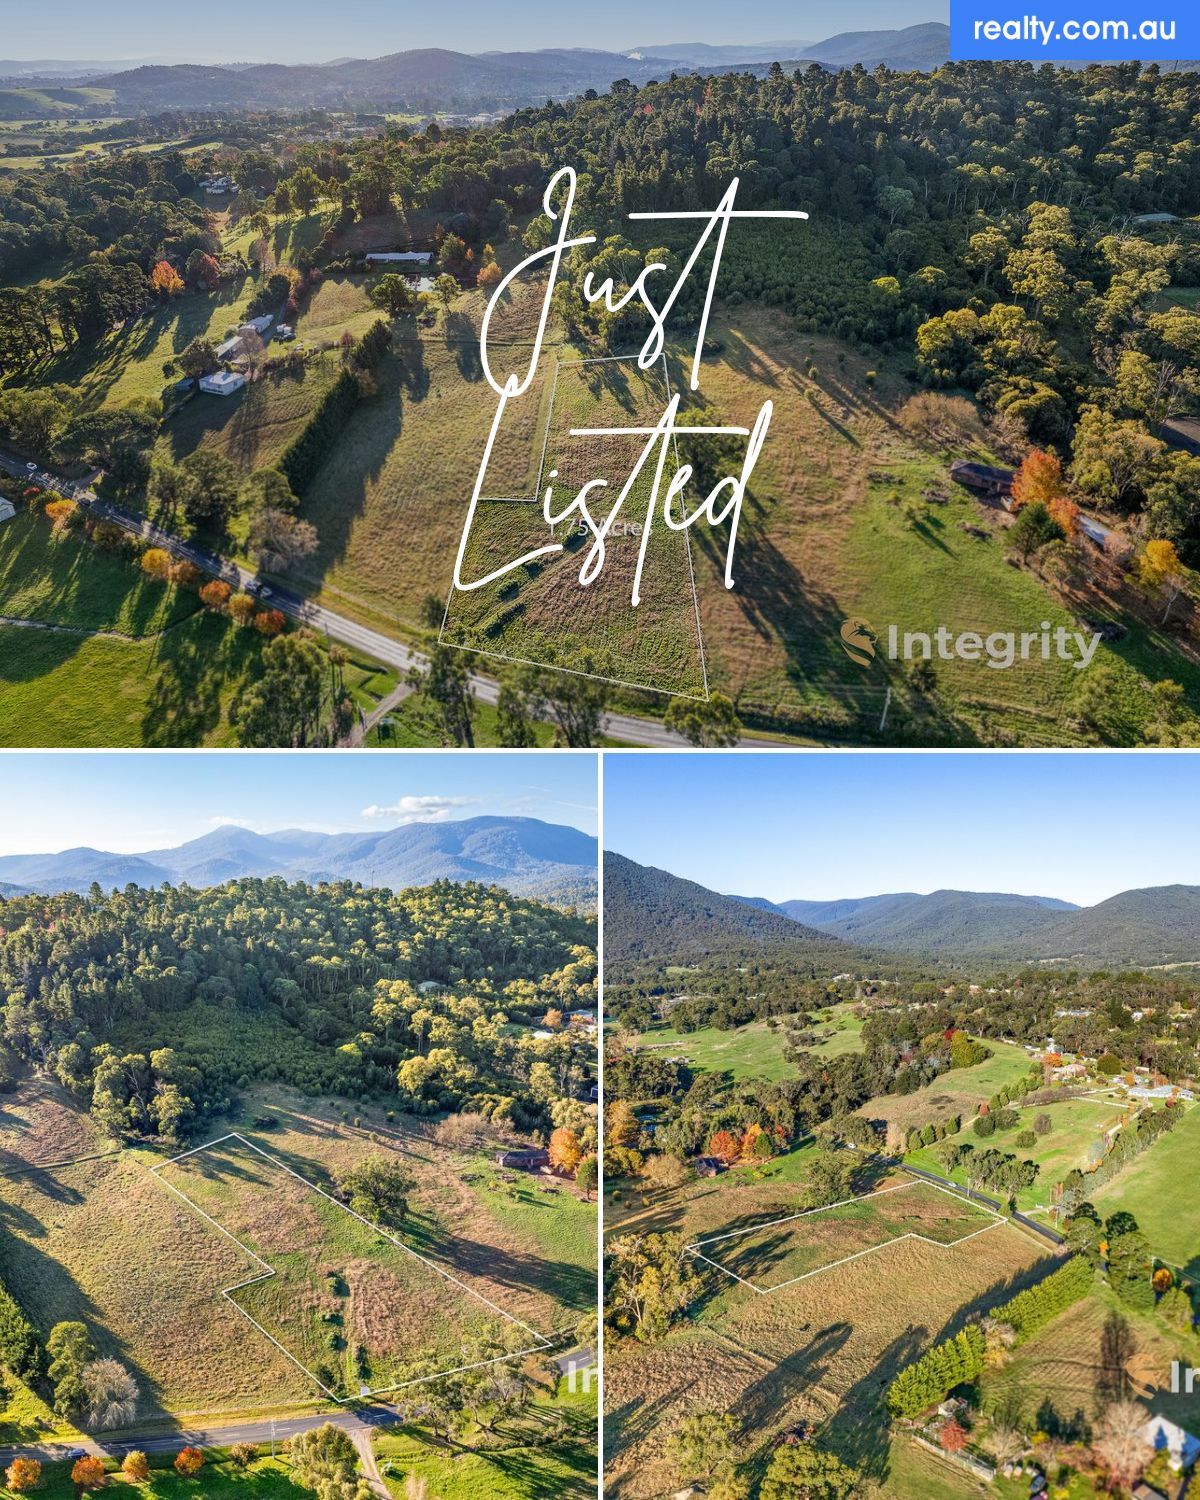 75 Airlie Road, Healesville, VIC 3777 | Realty.com.au